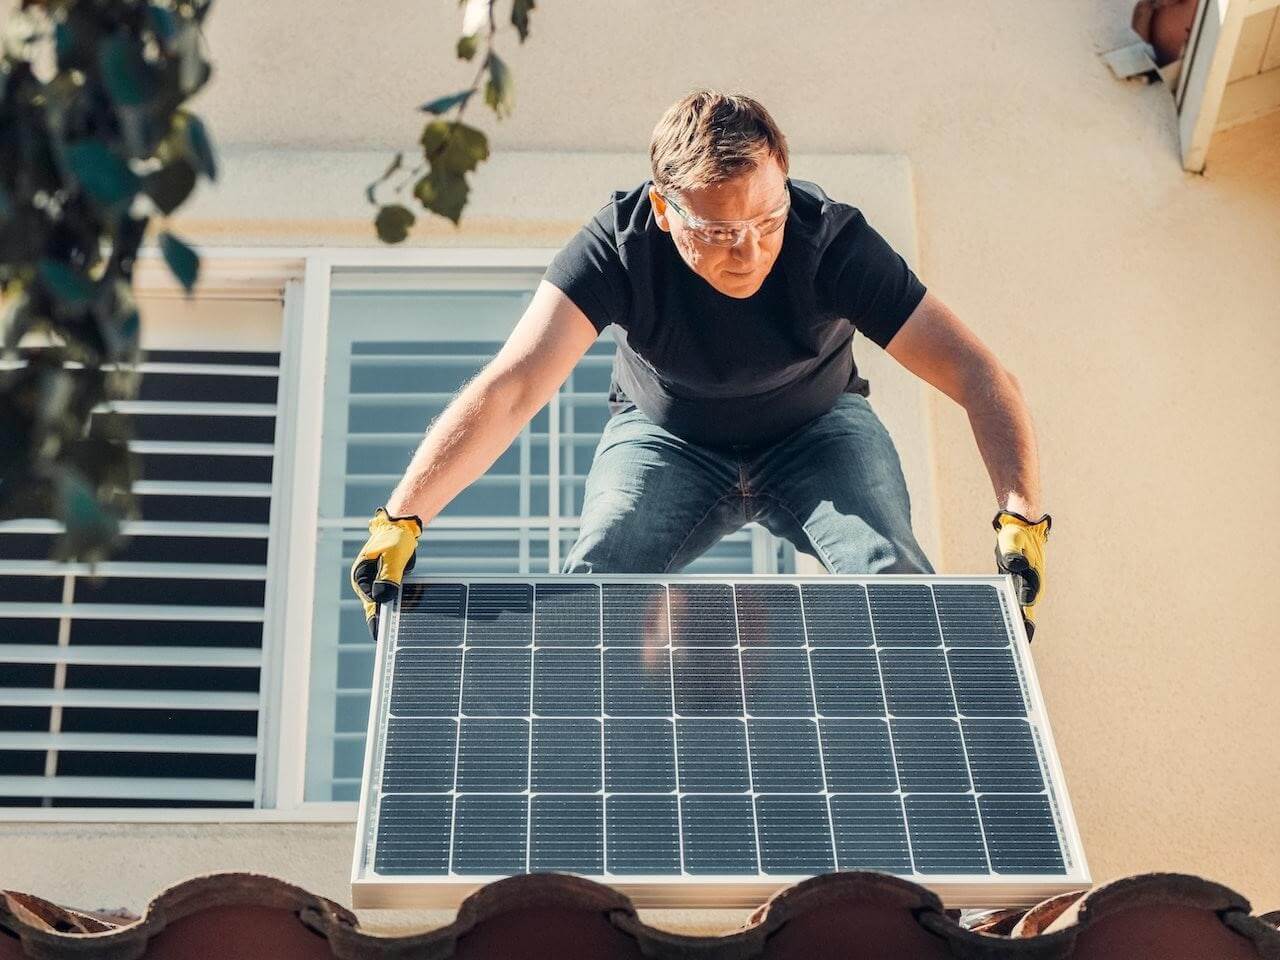 A man putting a solar panel on a roof.